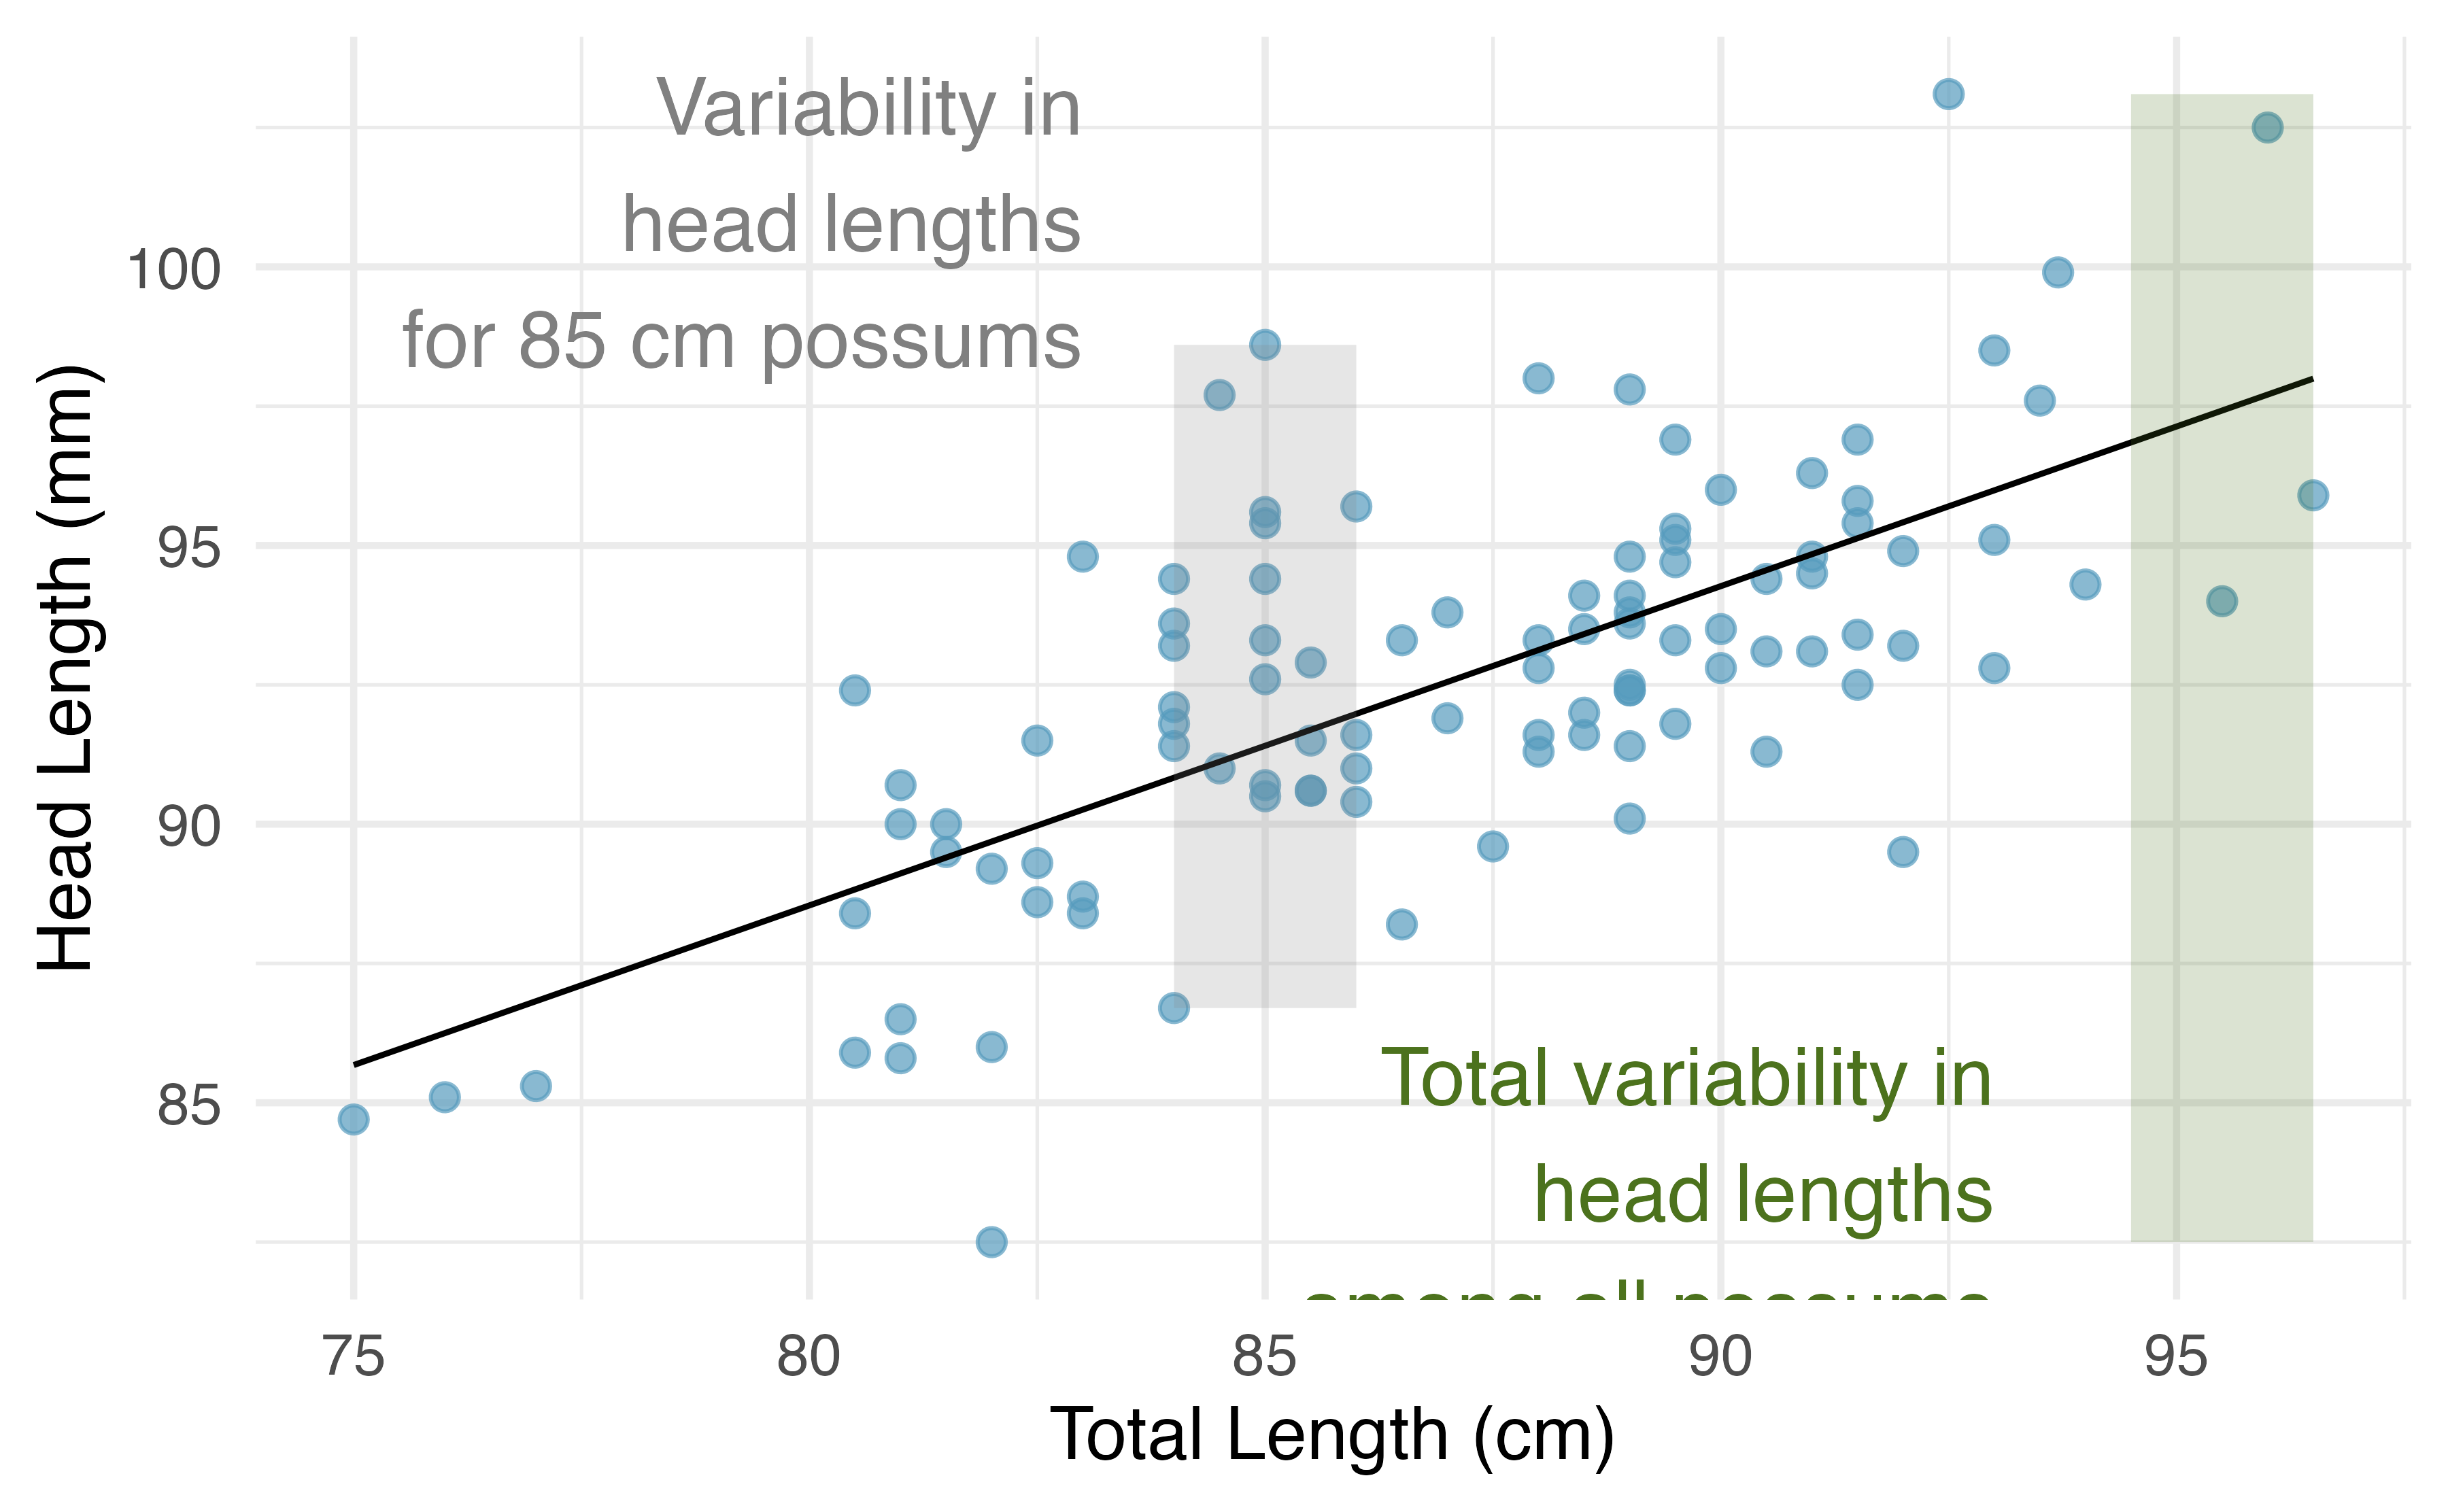 For these 104 possums, the range of head lengths is about 103 $-$ 83 = 20 mm. However, among possums of the same total length (e.g., 85 cm), the range in head lengths is reduced to about 10 mm, or about a 50% reduction, which matches $r^2 = 0.48$, or 48%.